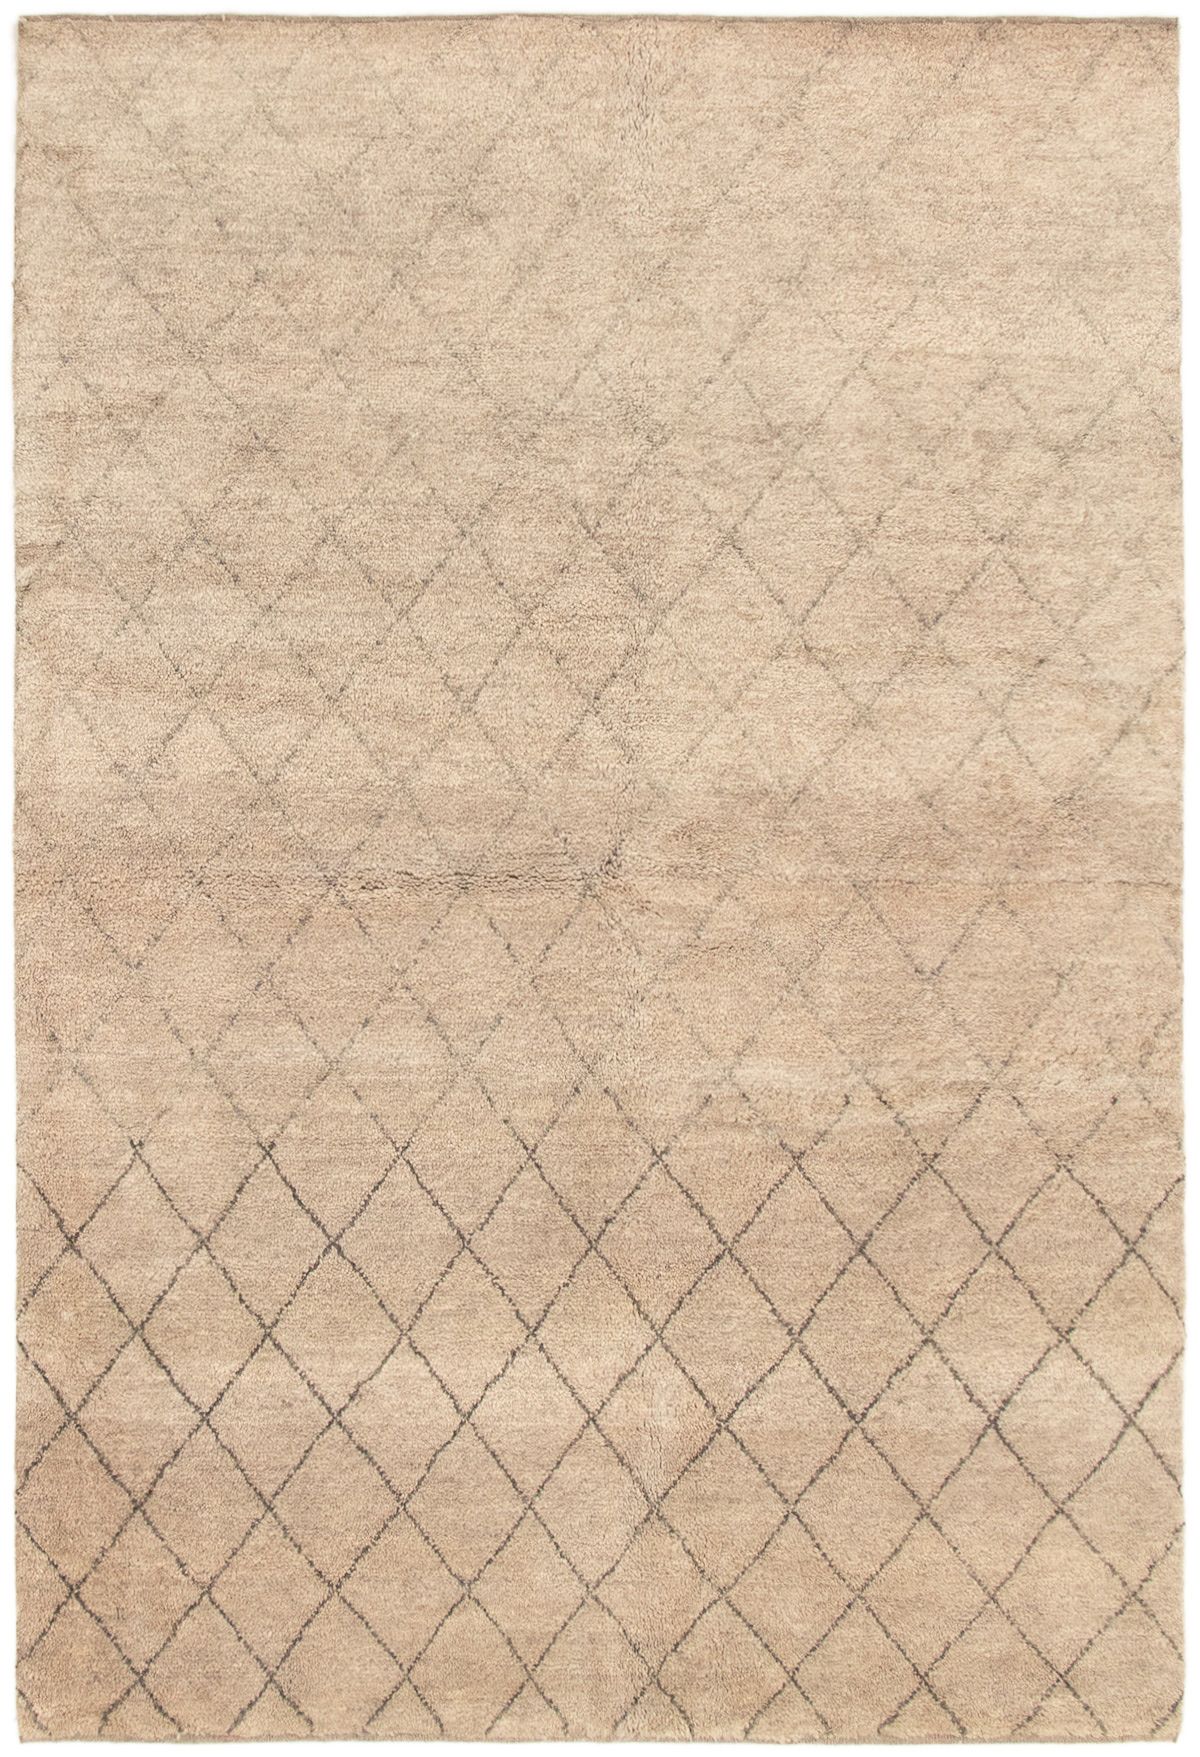 Hand-knotted Arlequin Grey, Tan Wool Rug 6'1" x 9'0" Size: 6'1" x 9'0"  